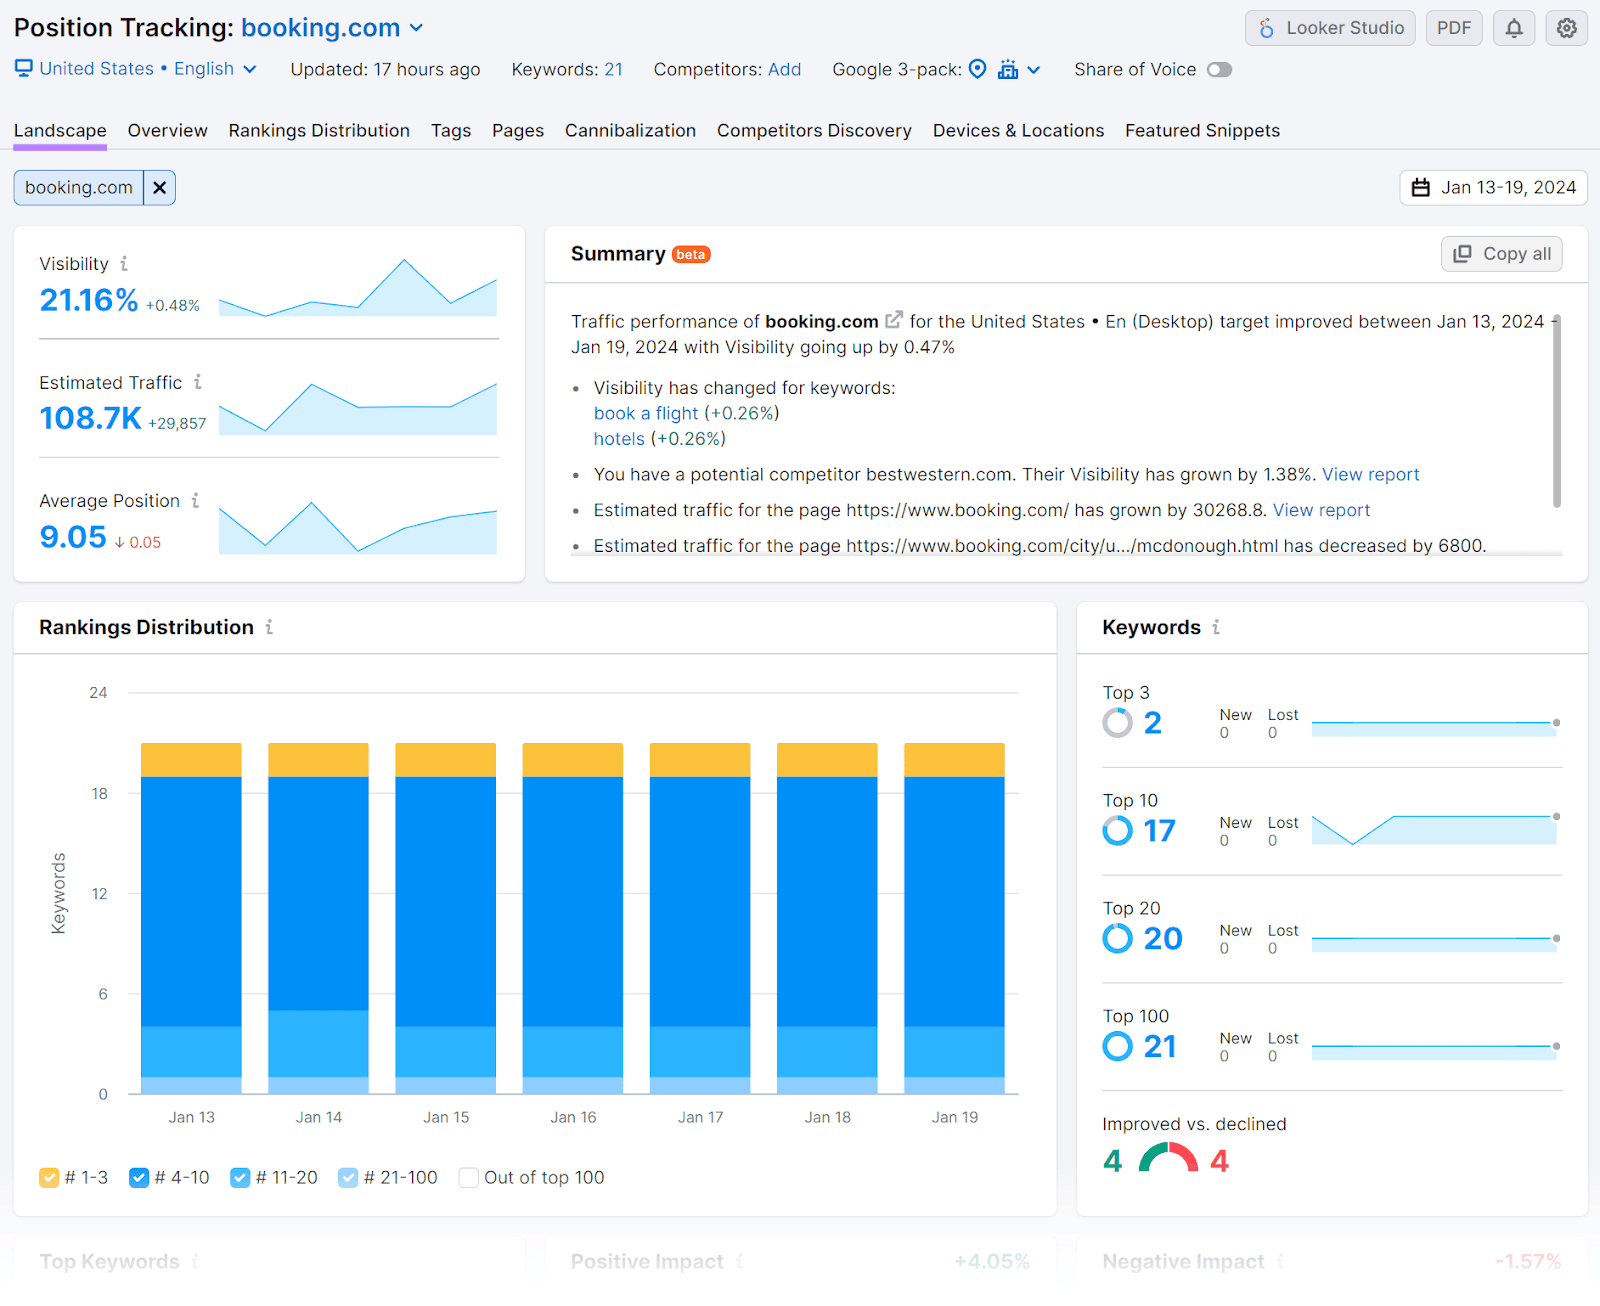 Position Tracking tool's landscape report